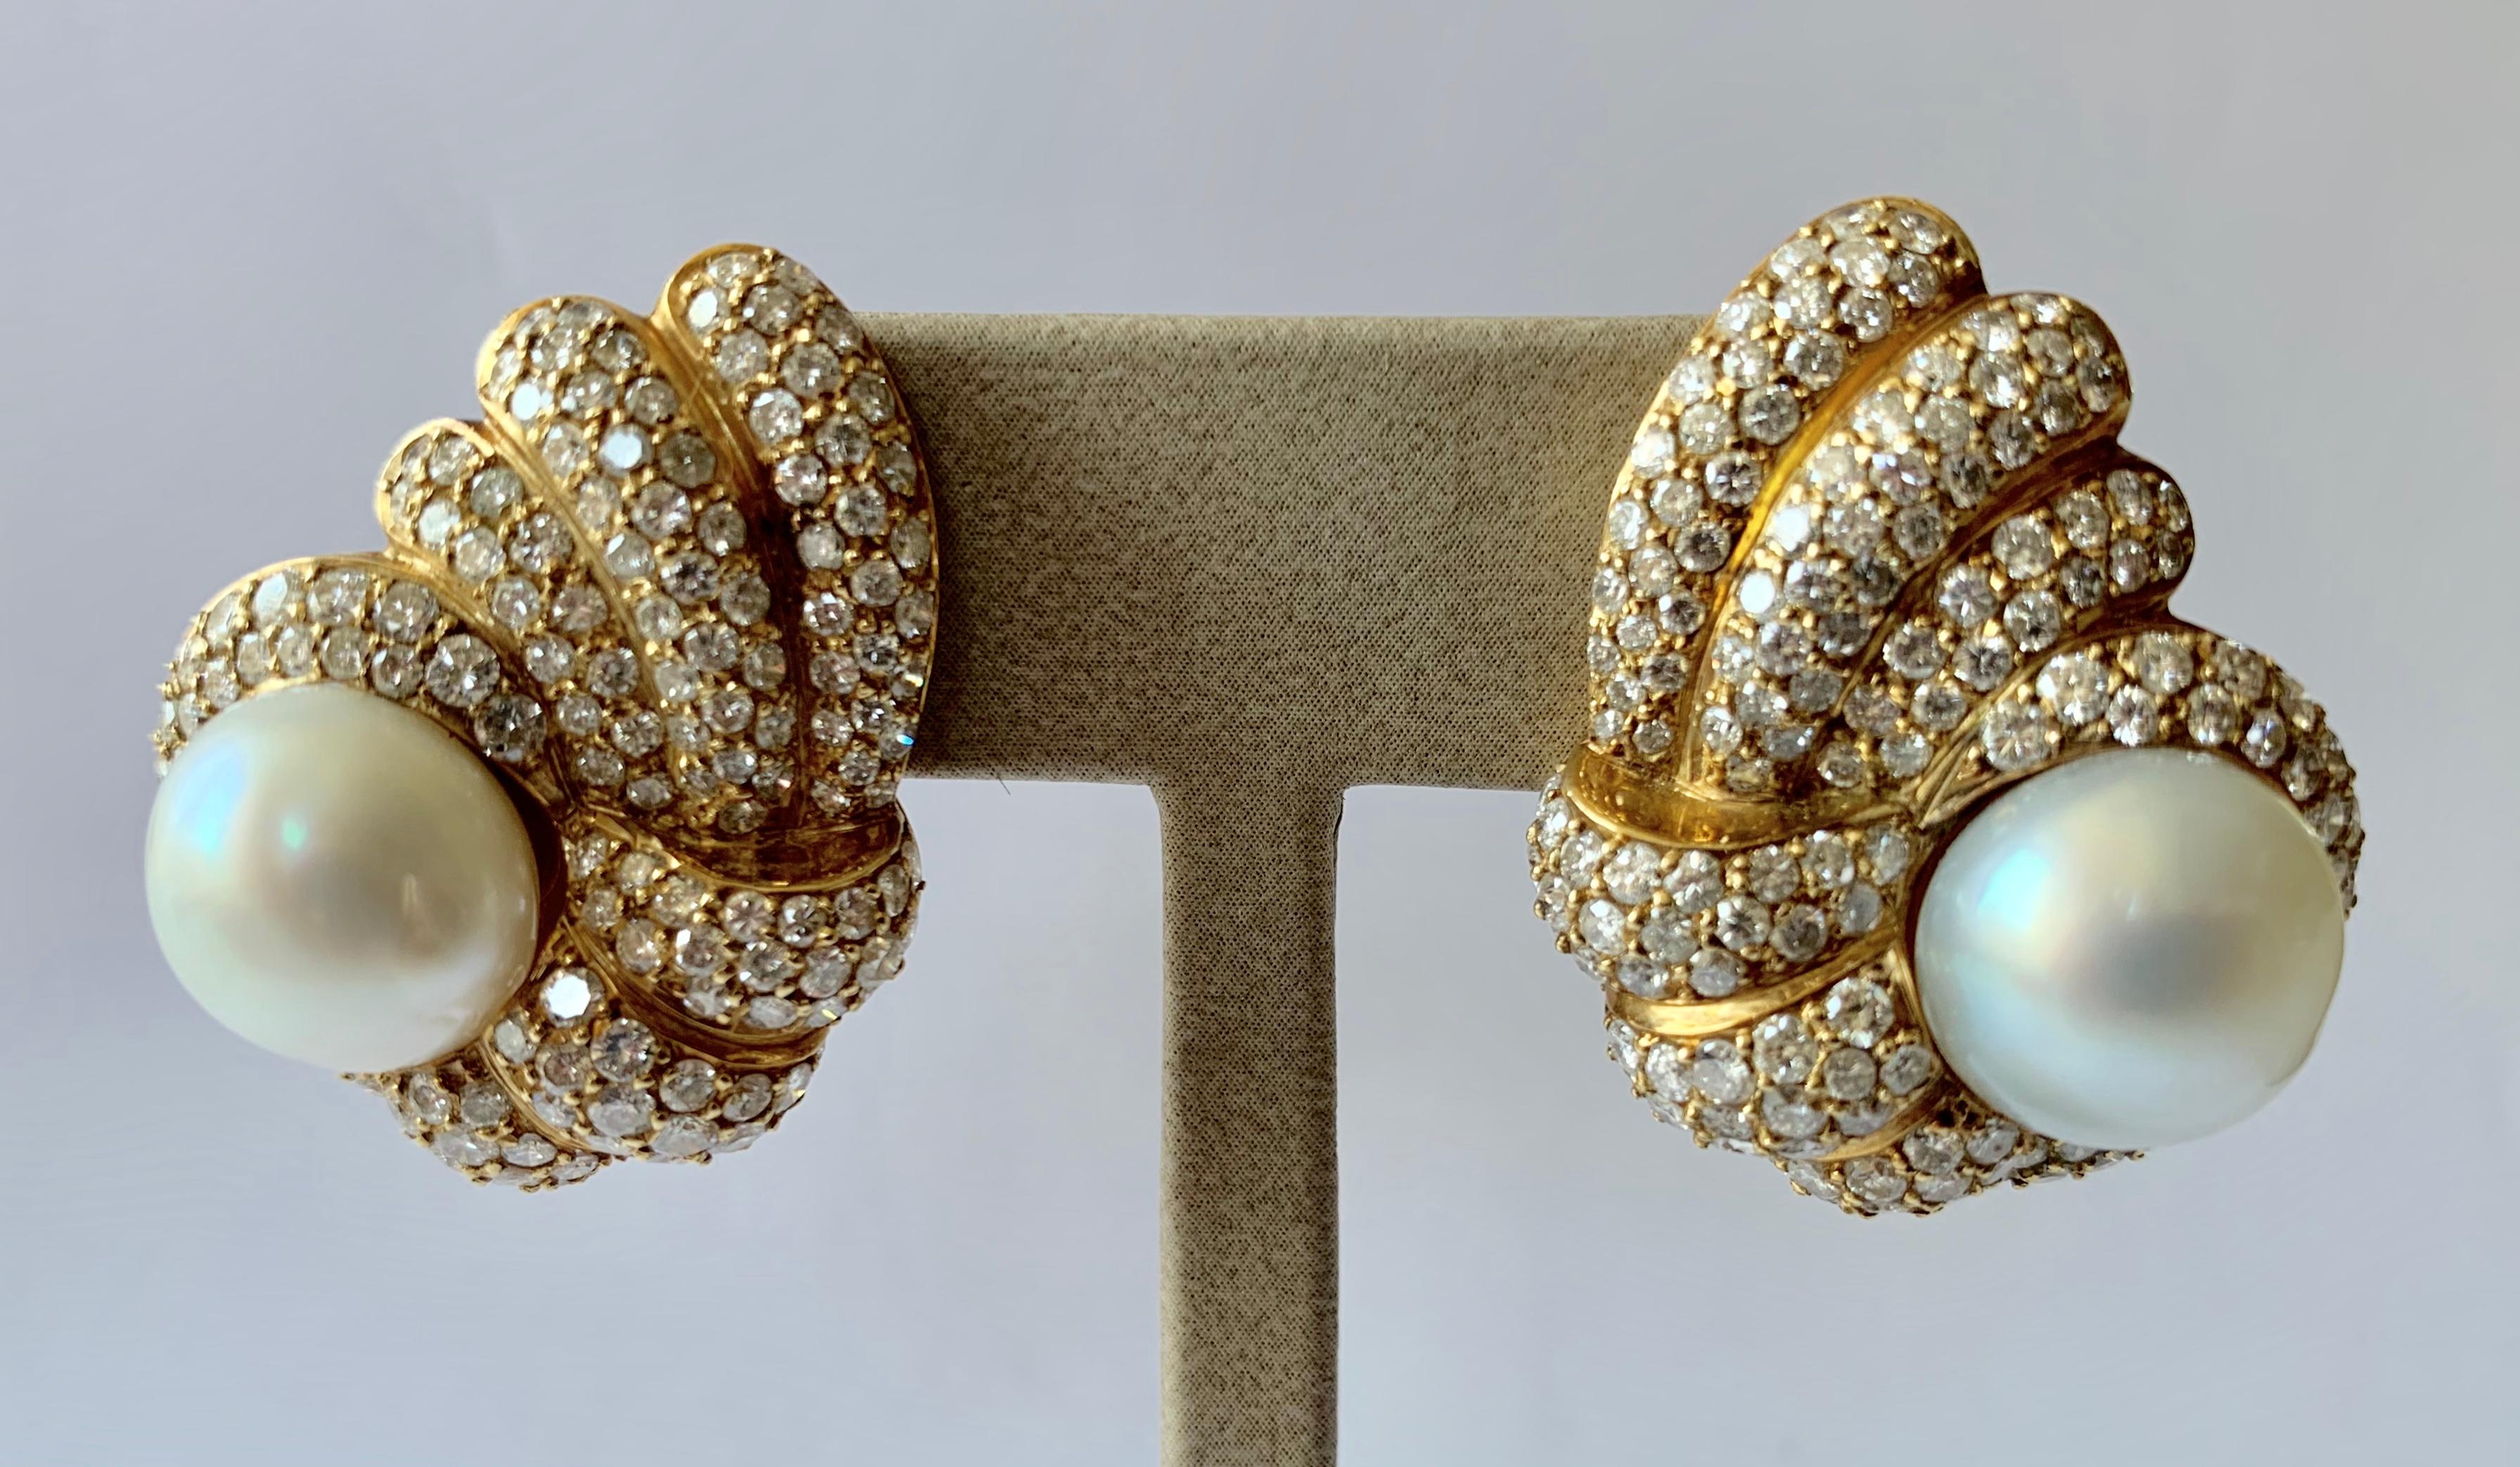 Elegant 18k yellow gold ladies clip-on earrings with south sea pearls and set with a total of 292 brilliant cut diamonds weighing approximately 6.50 ct, G color, vs clarity. 